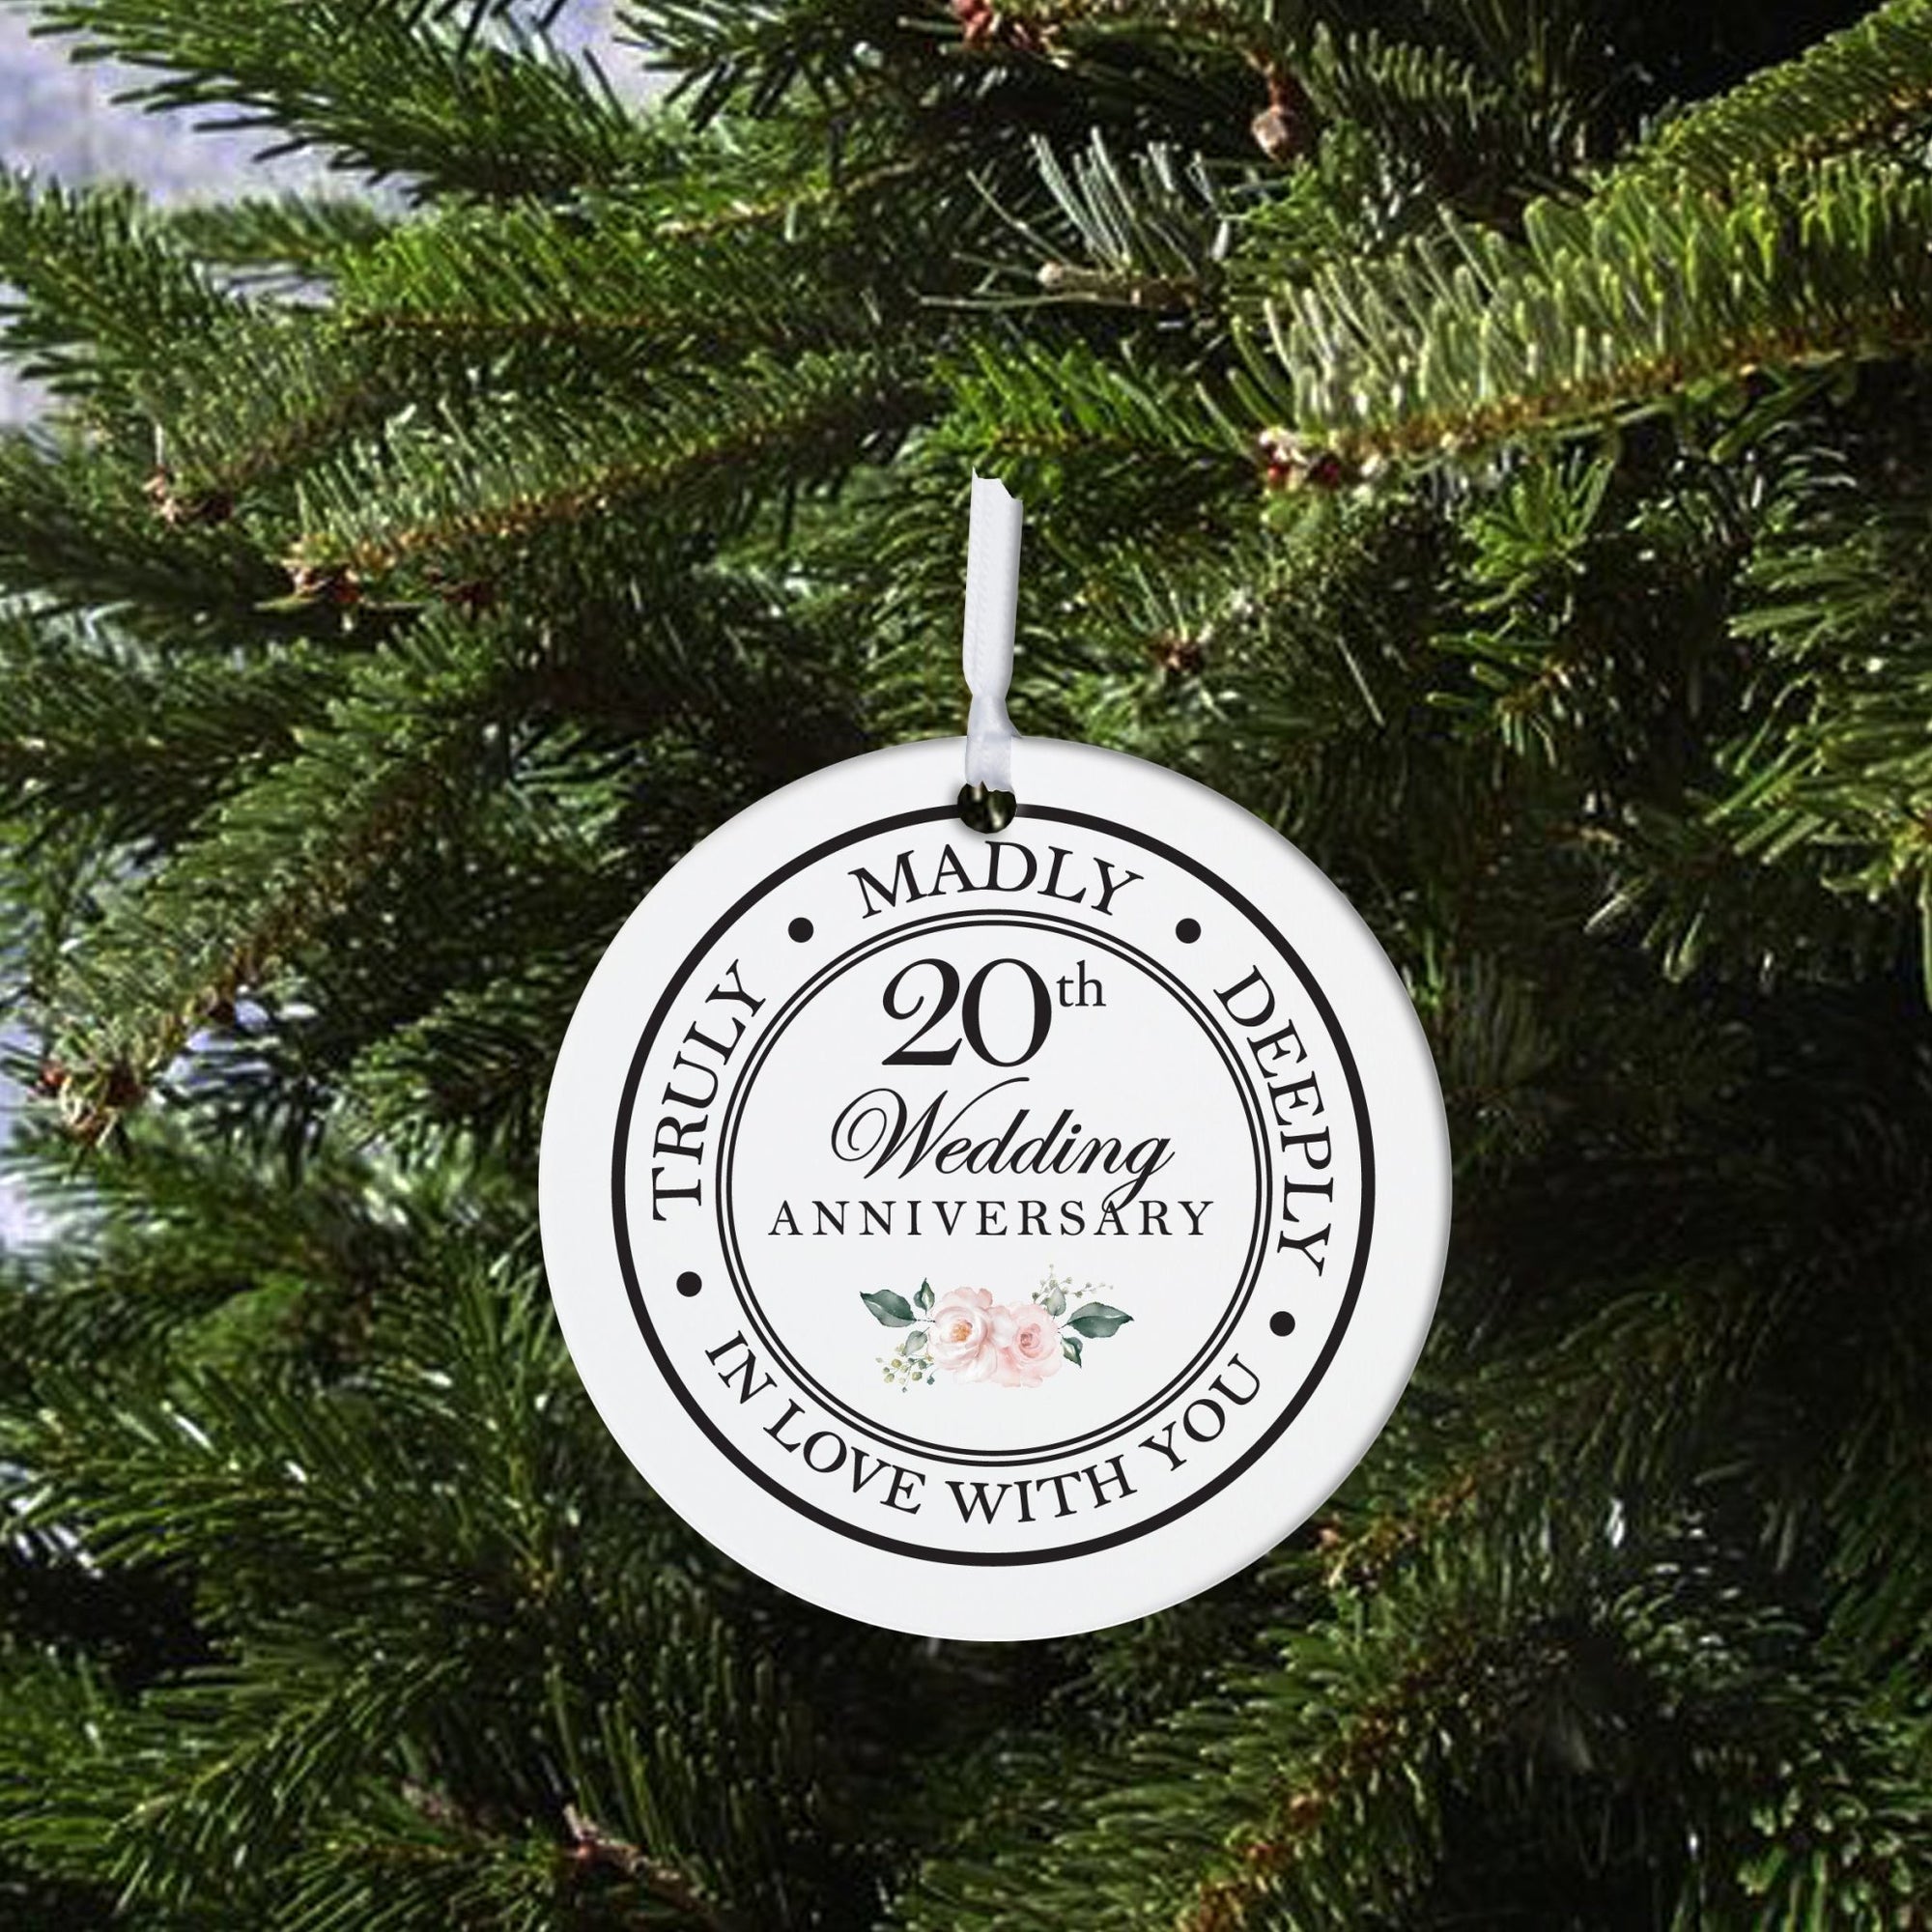 20th Wedding Anniversary White Ornament With Inspirational Message Gift Ideas - Truly, Madly, Deeply In Love With You - LifeSong Milestones